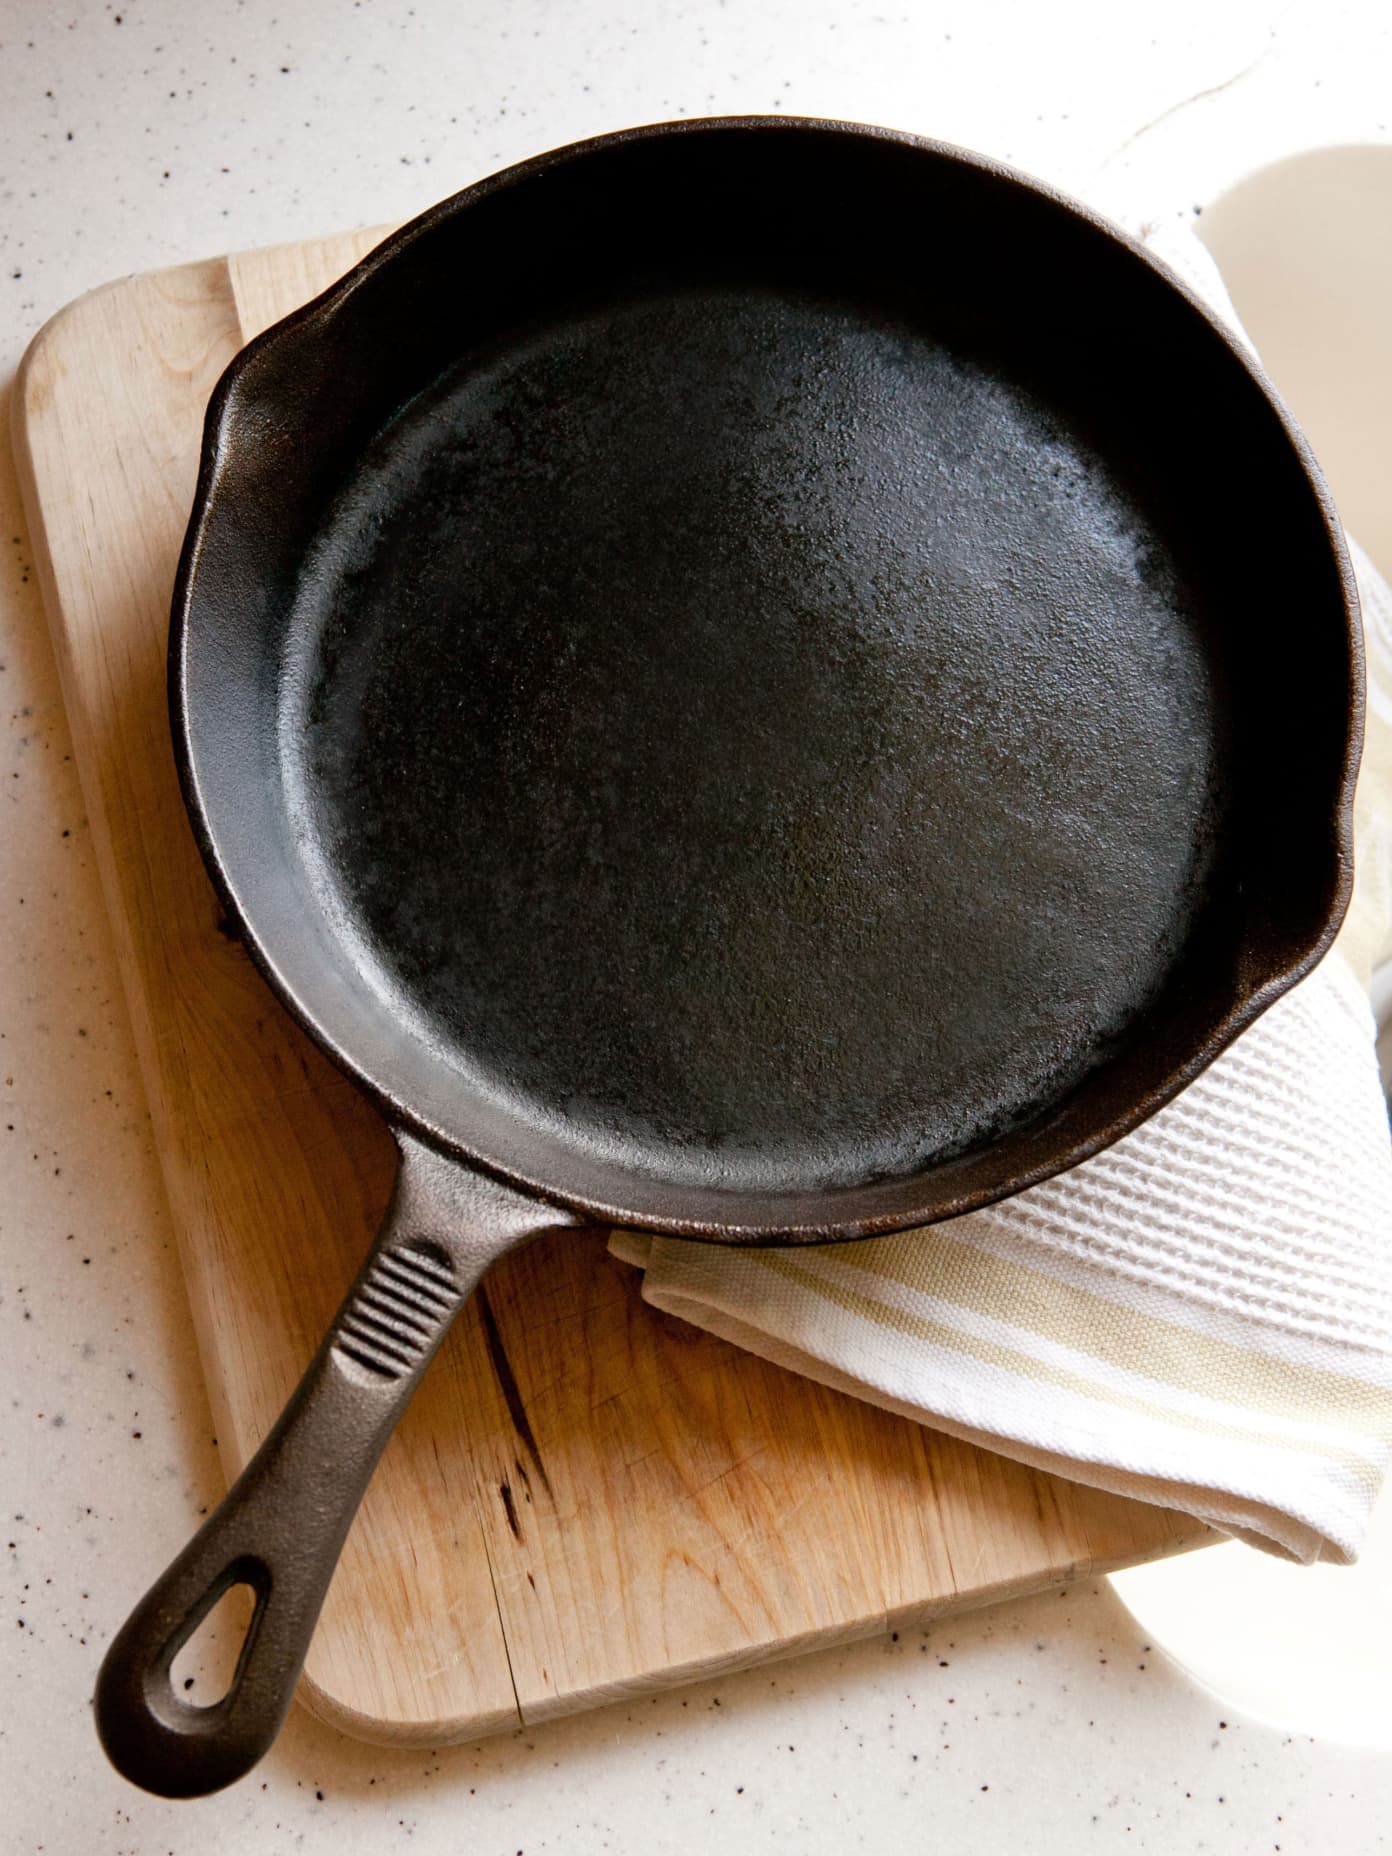 How to Clean a Rusty Cast-Iron Skillet